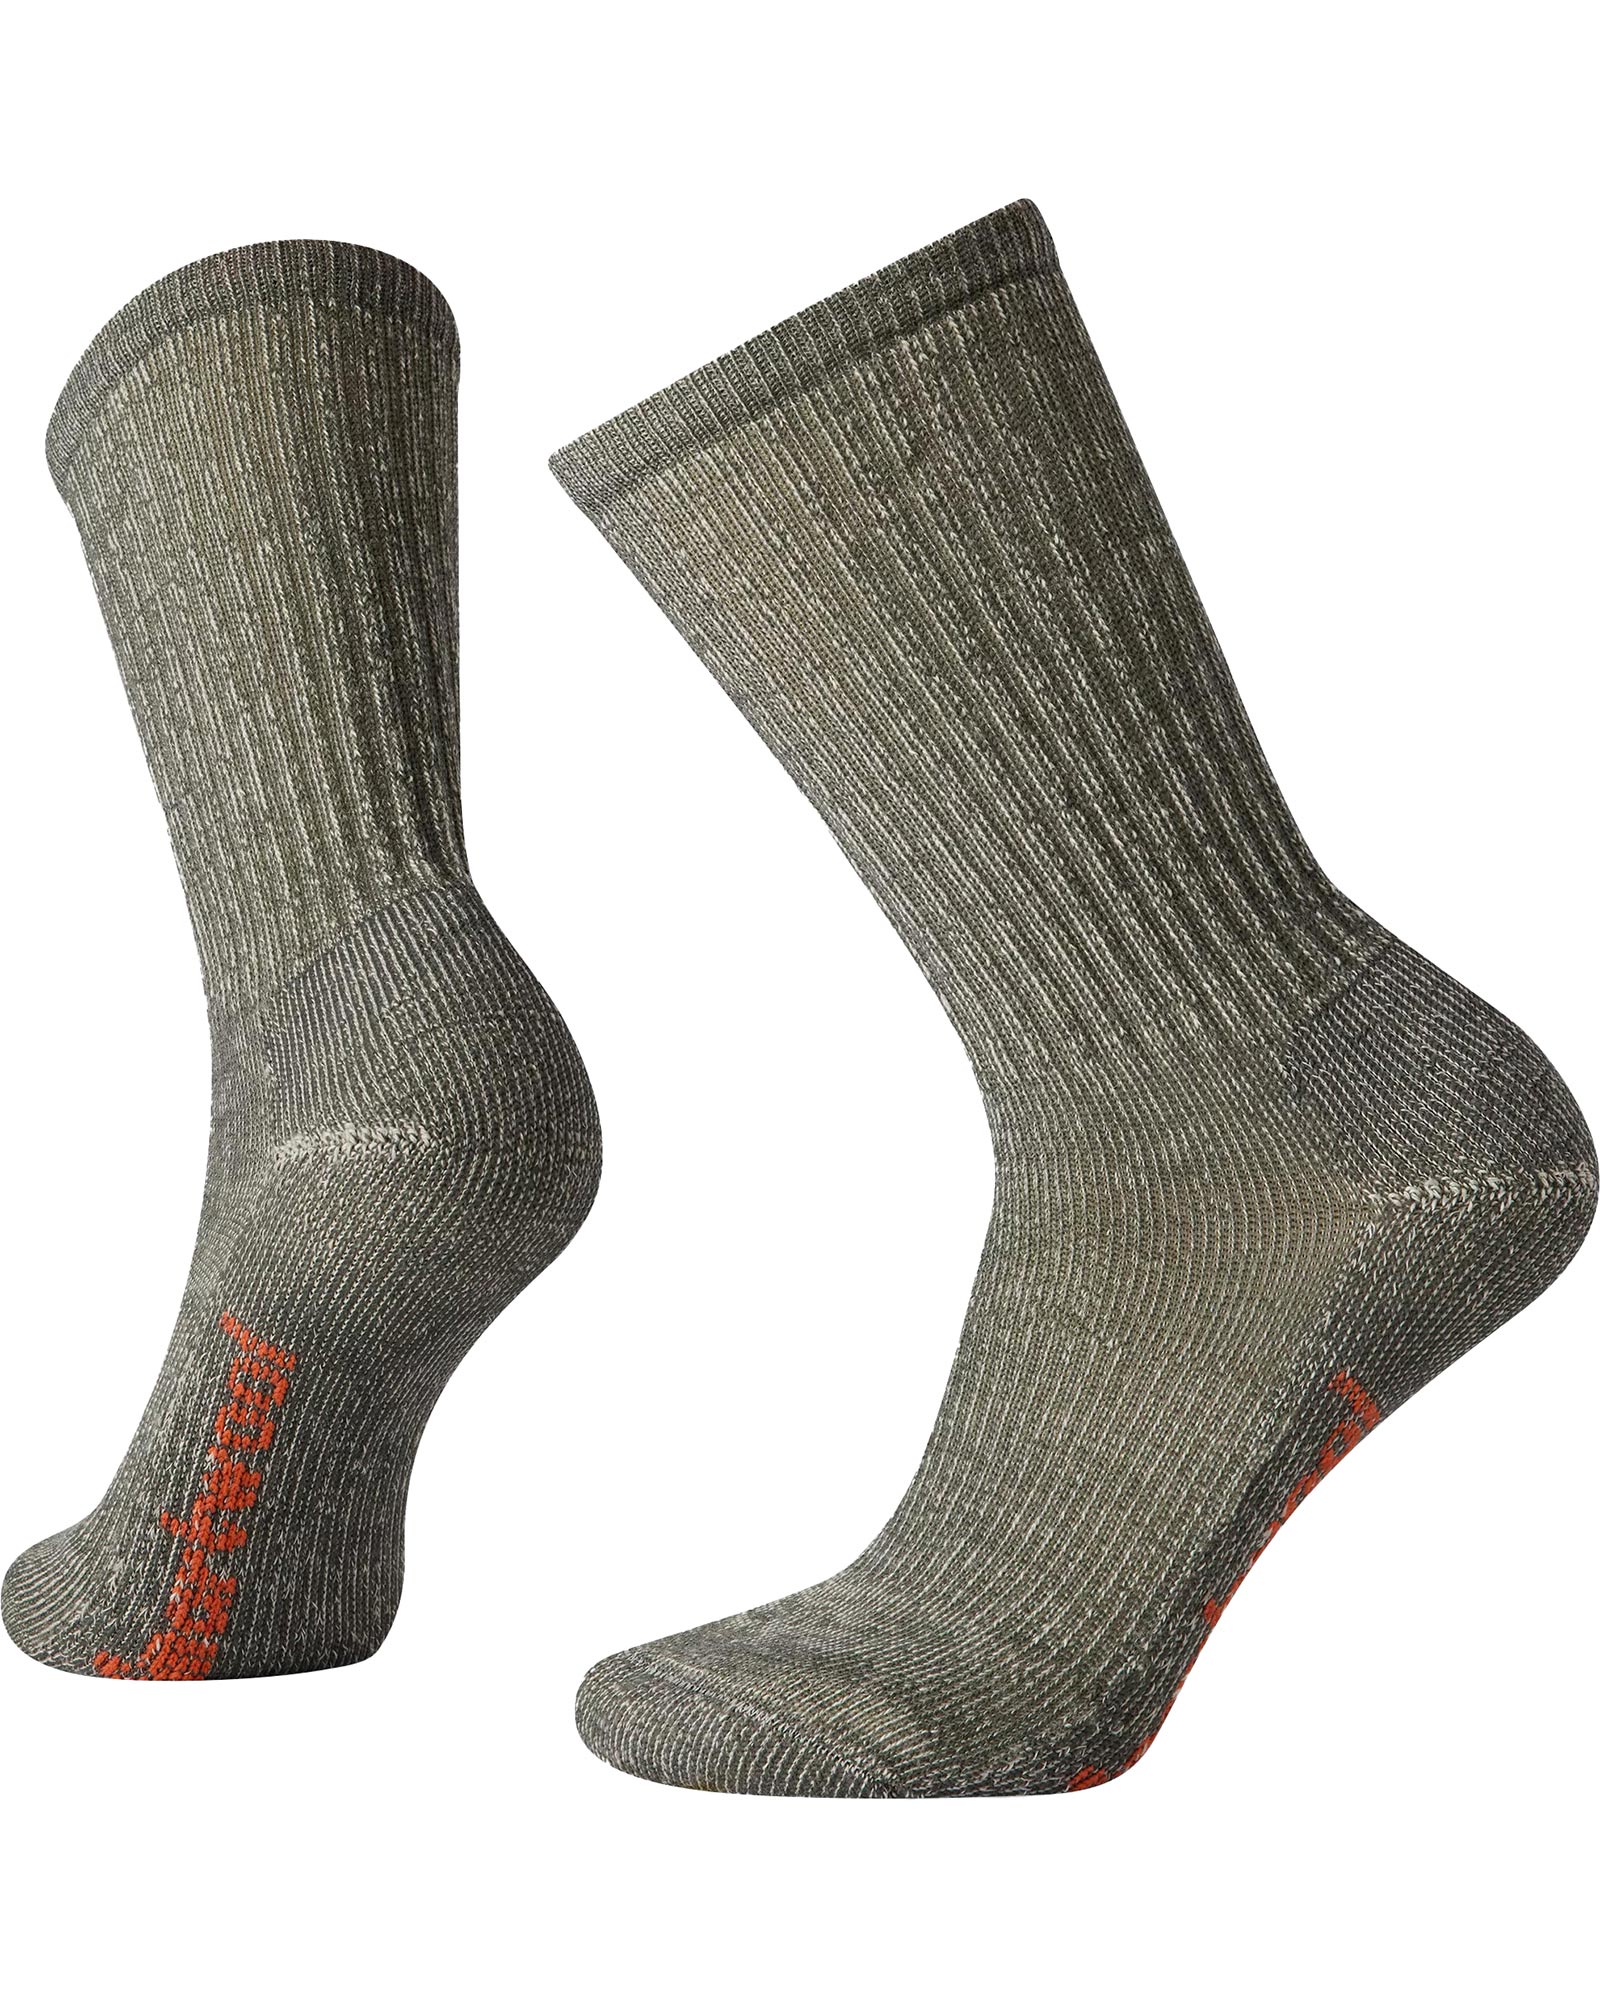 Smartwool Mens Mountaineering Extra Heavy Crew Socks XL Taupe 